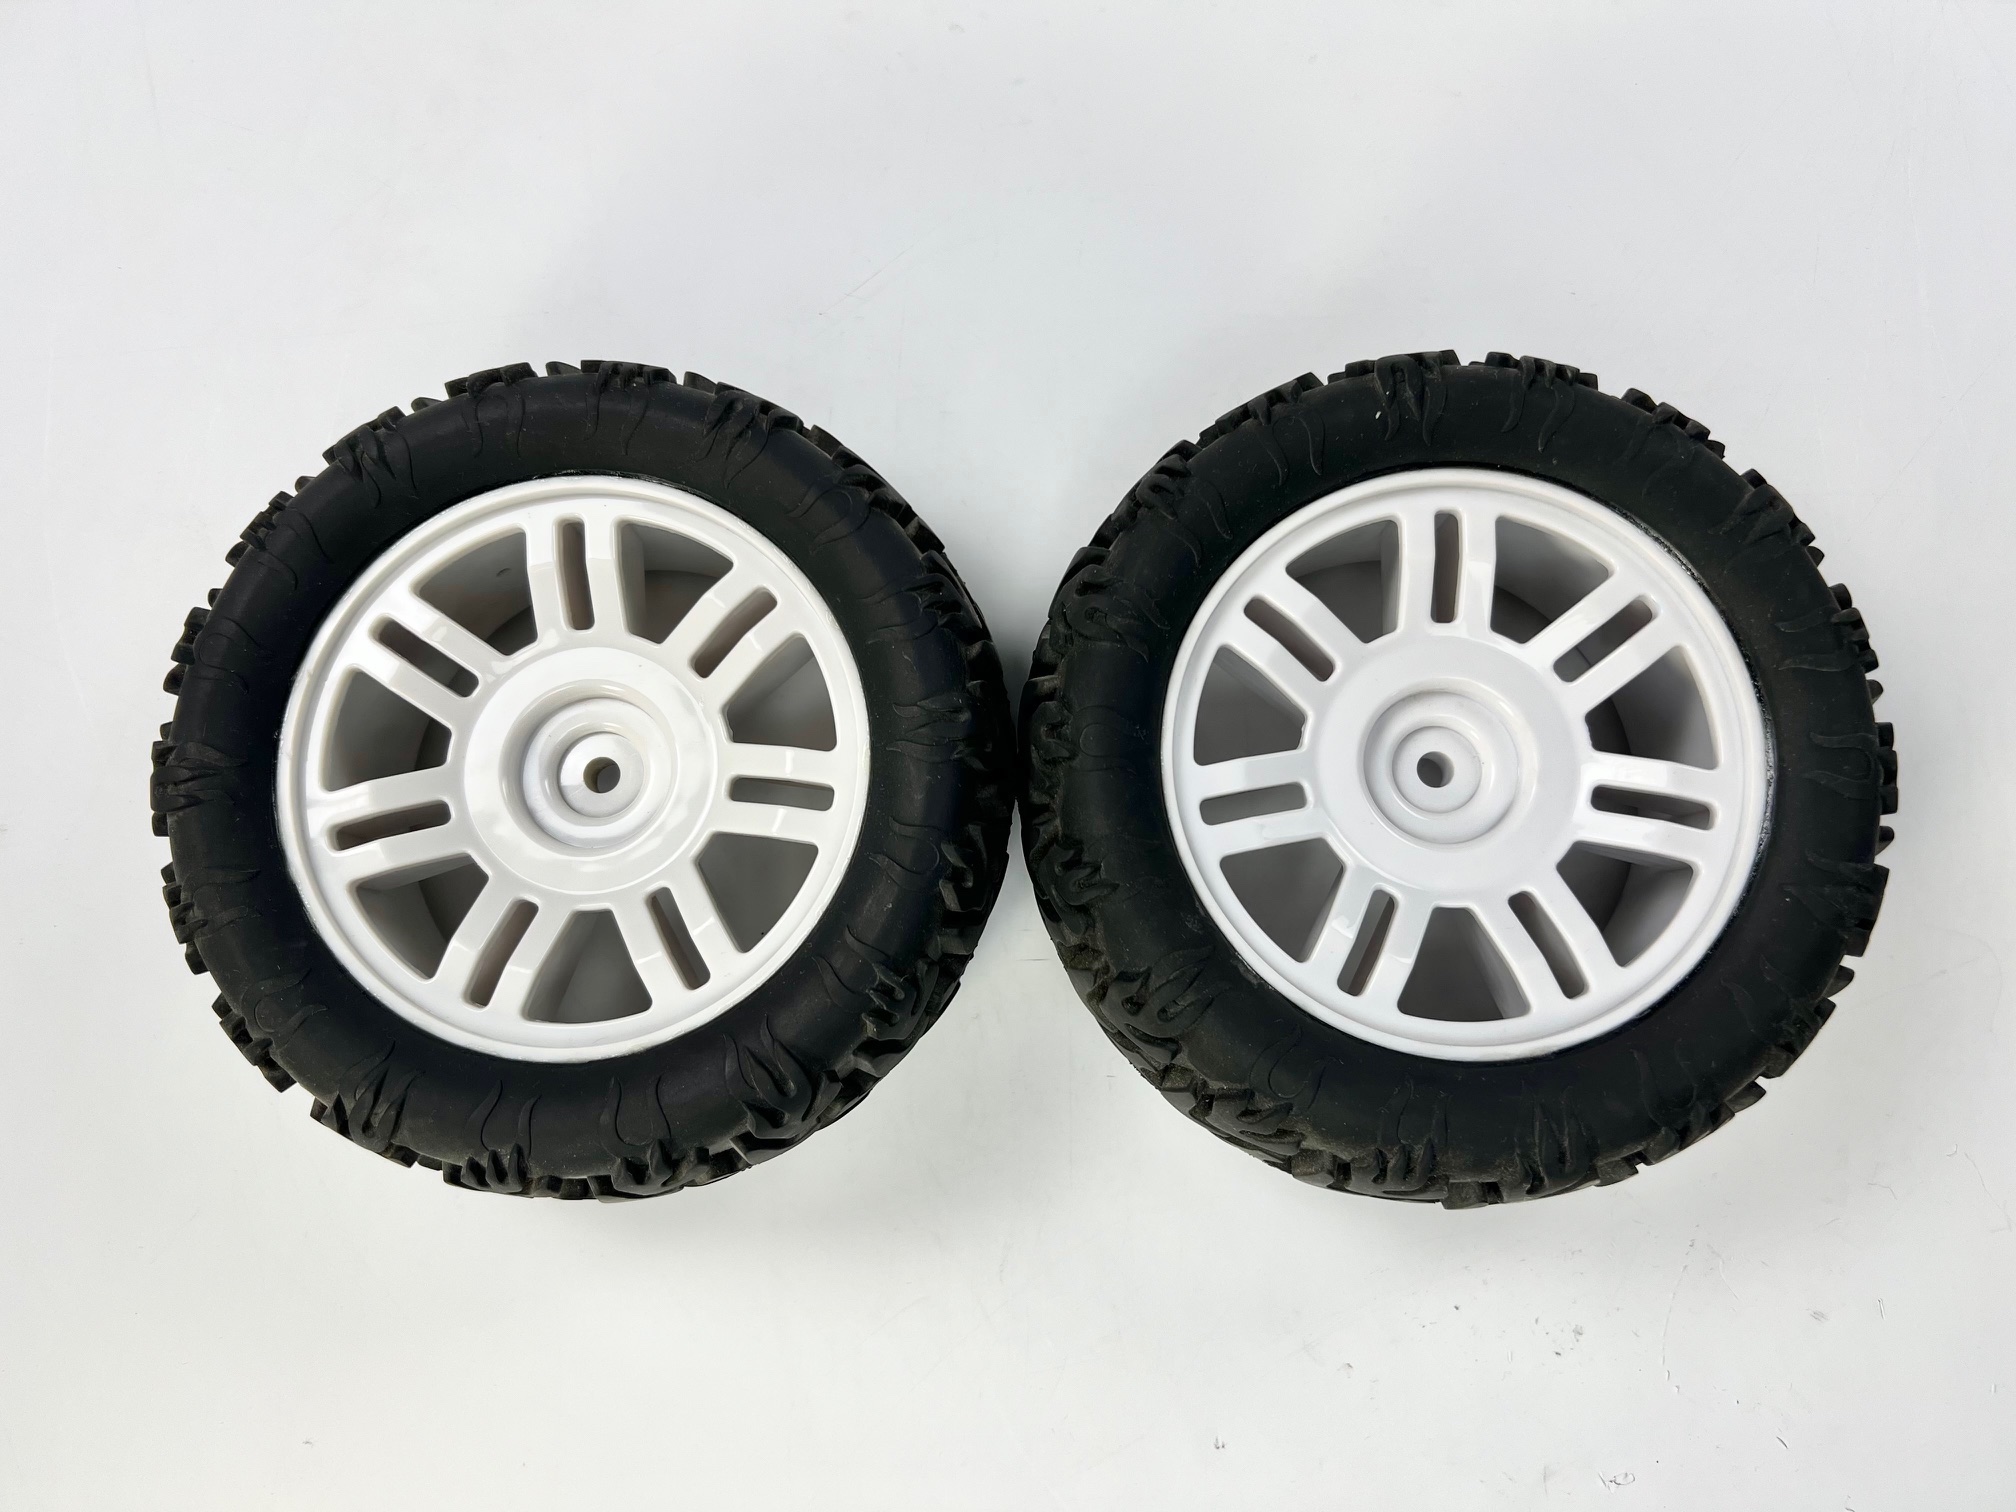 1 pair of off-road tyres on white rim with 18 mm square bonded "8"